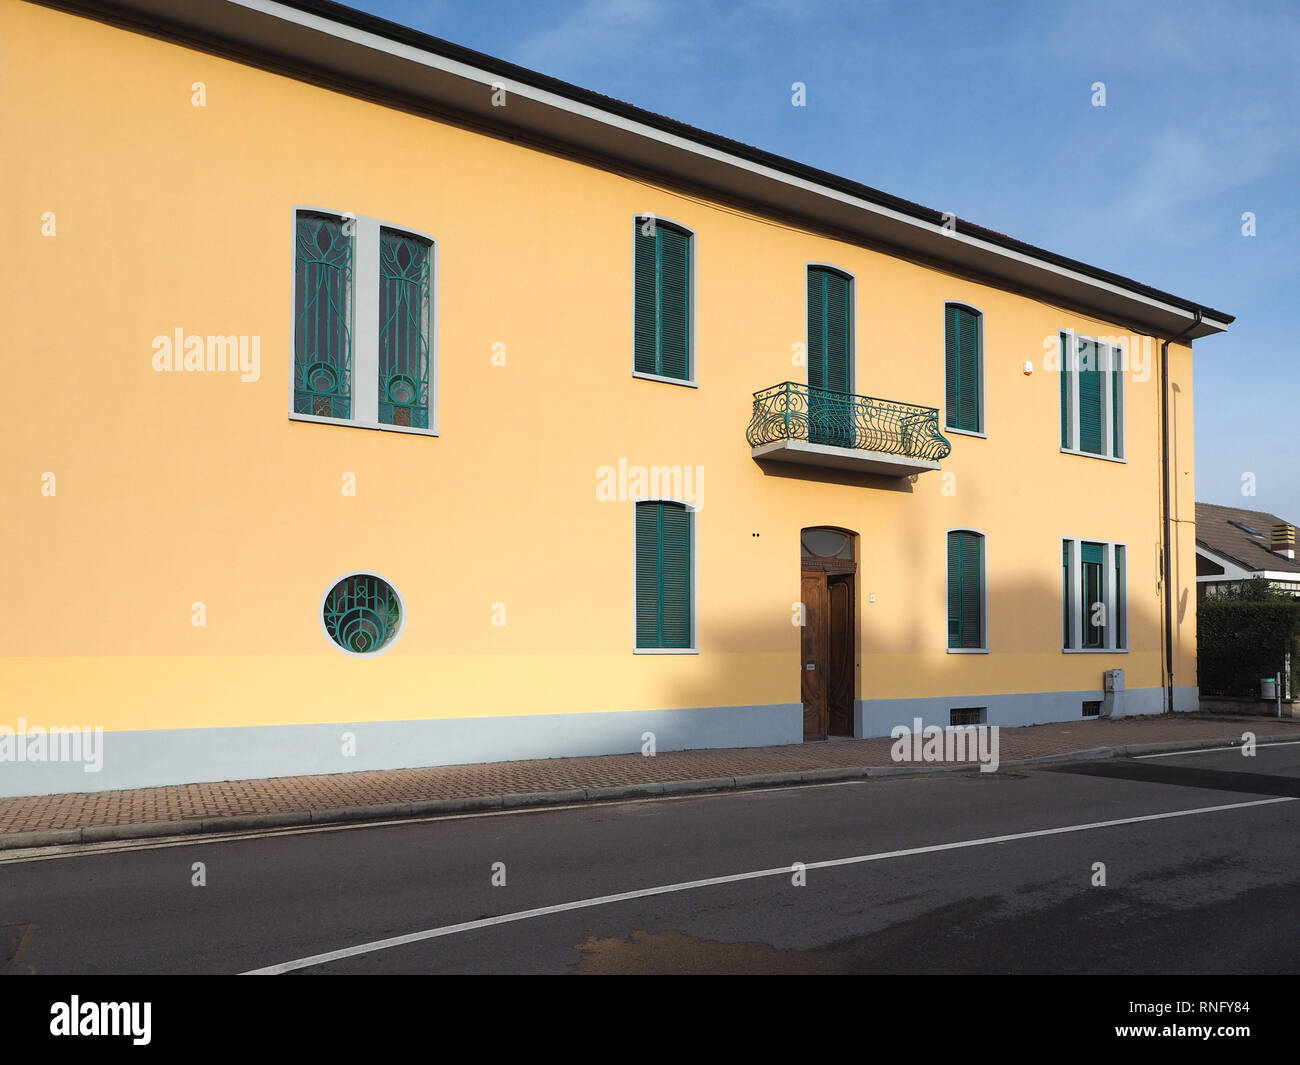 SETTIMO TORINESE, ITALY - CIRCA FEBRUARY 2019: Siva former paint factory where Primo Levi worked from 1948 to 1973 Stock Photo